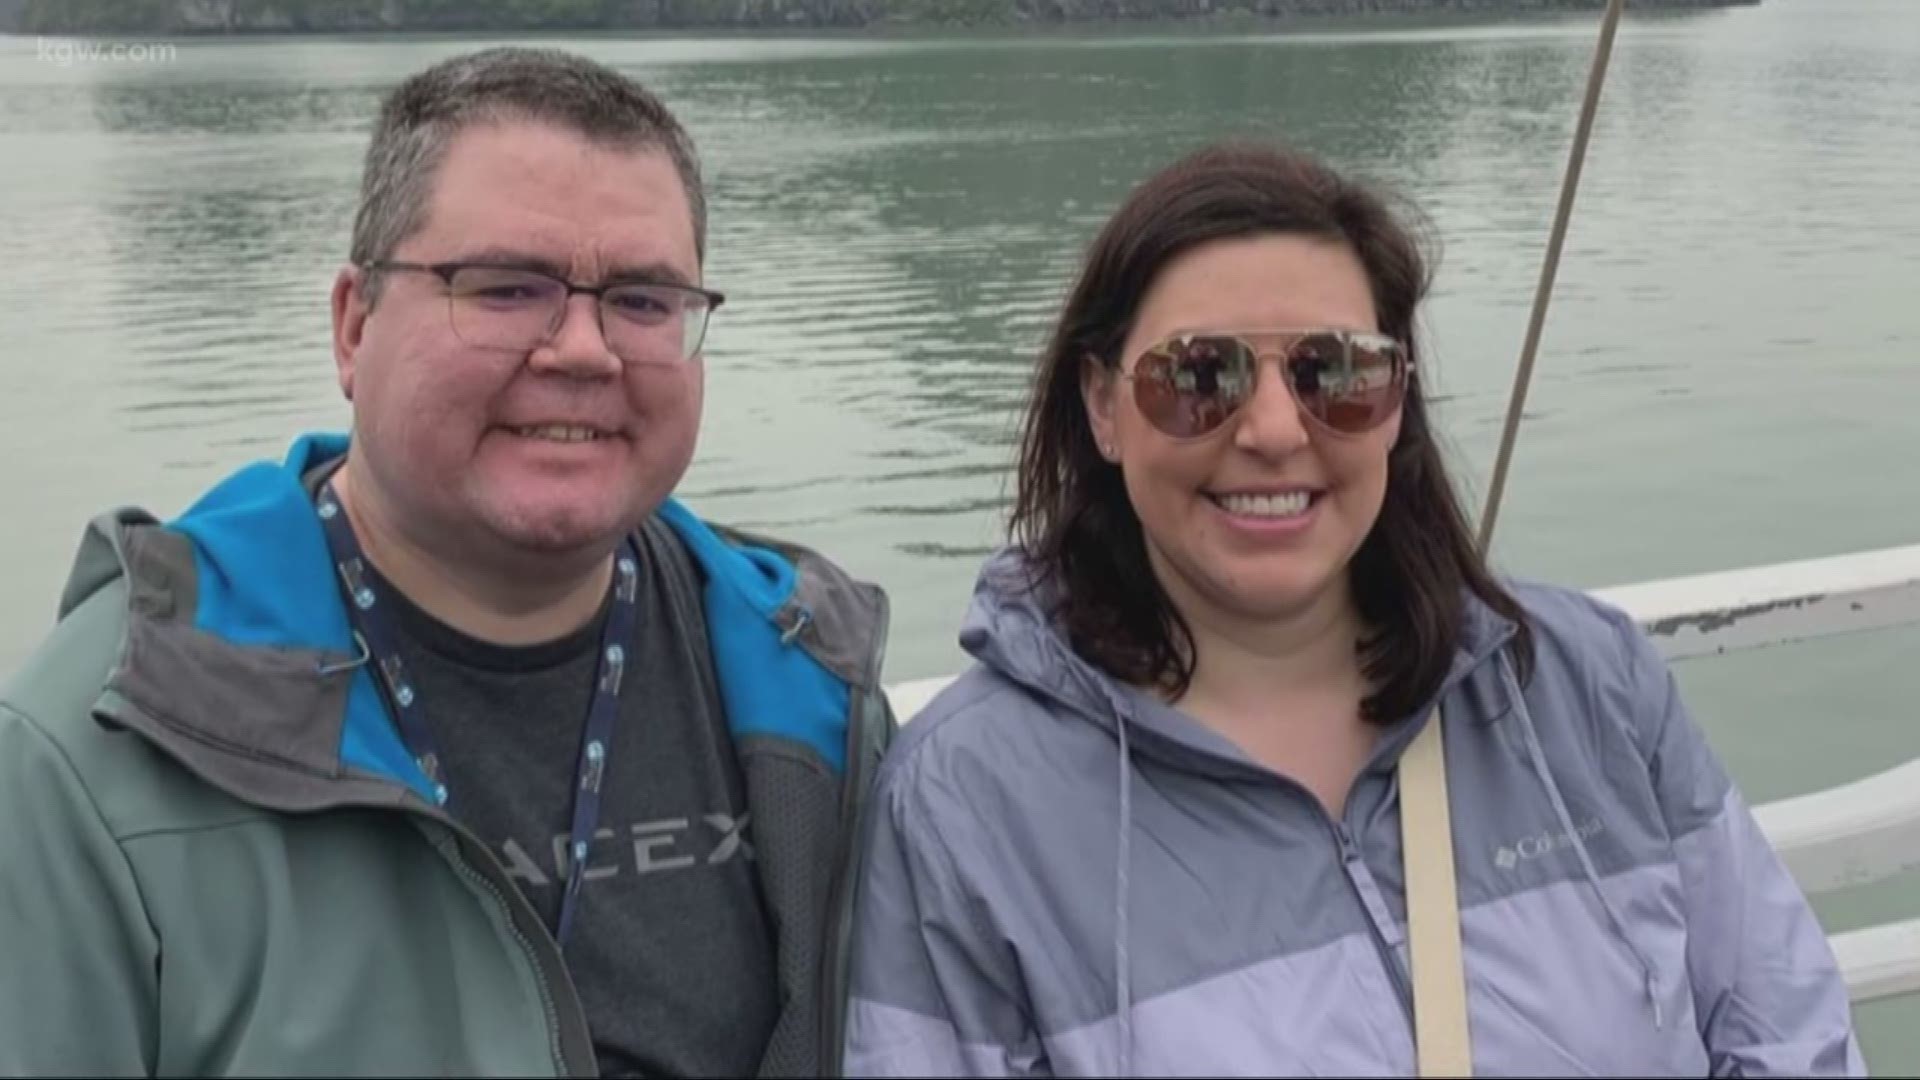 Forest Grove man Kent Frasure has finally been allowed to leave the Diamond Princess cruise ship after being quarantined for three weeks over coronavirus exposure.